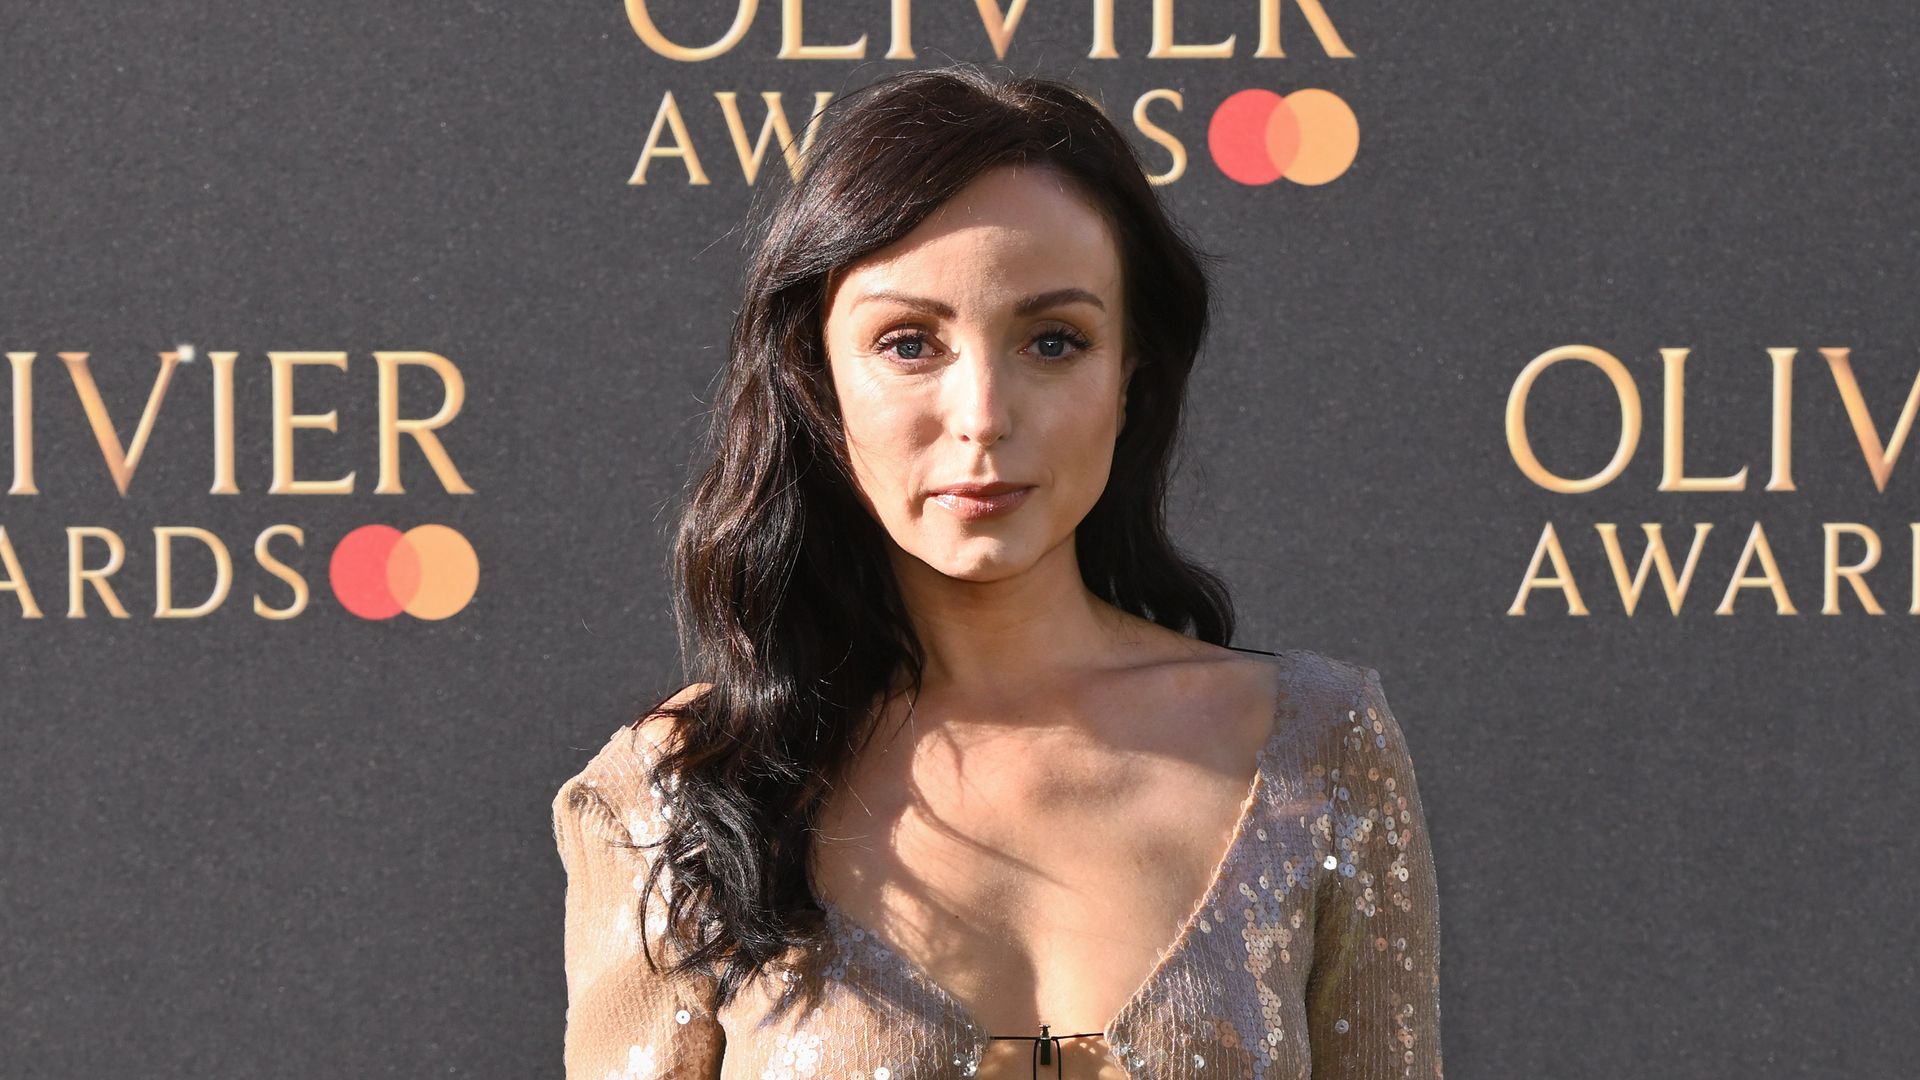 Helen George posing in nude sequin dress at Olivier Awards